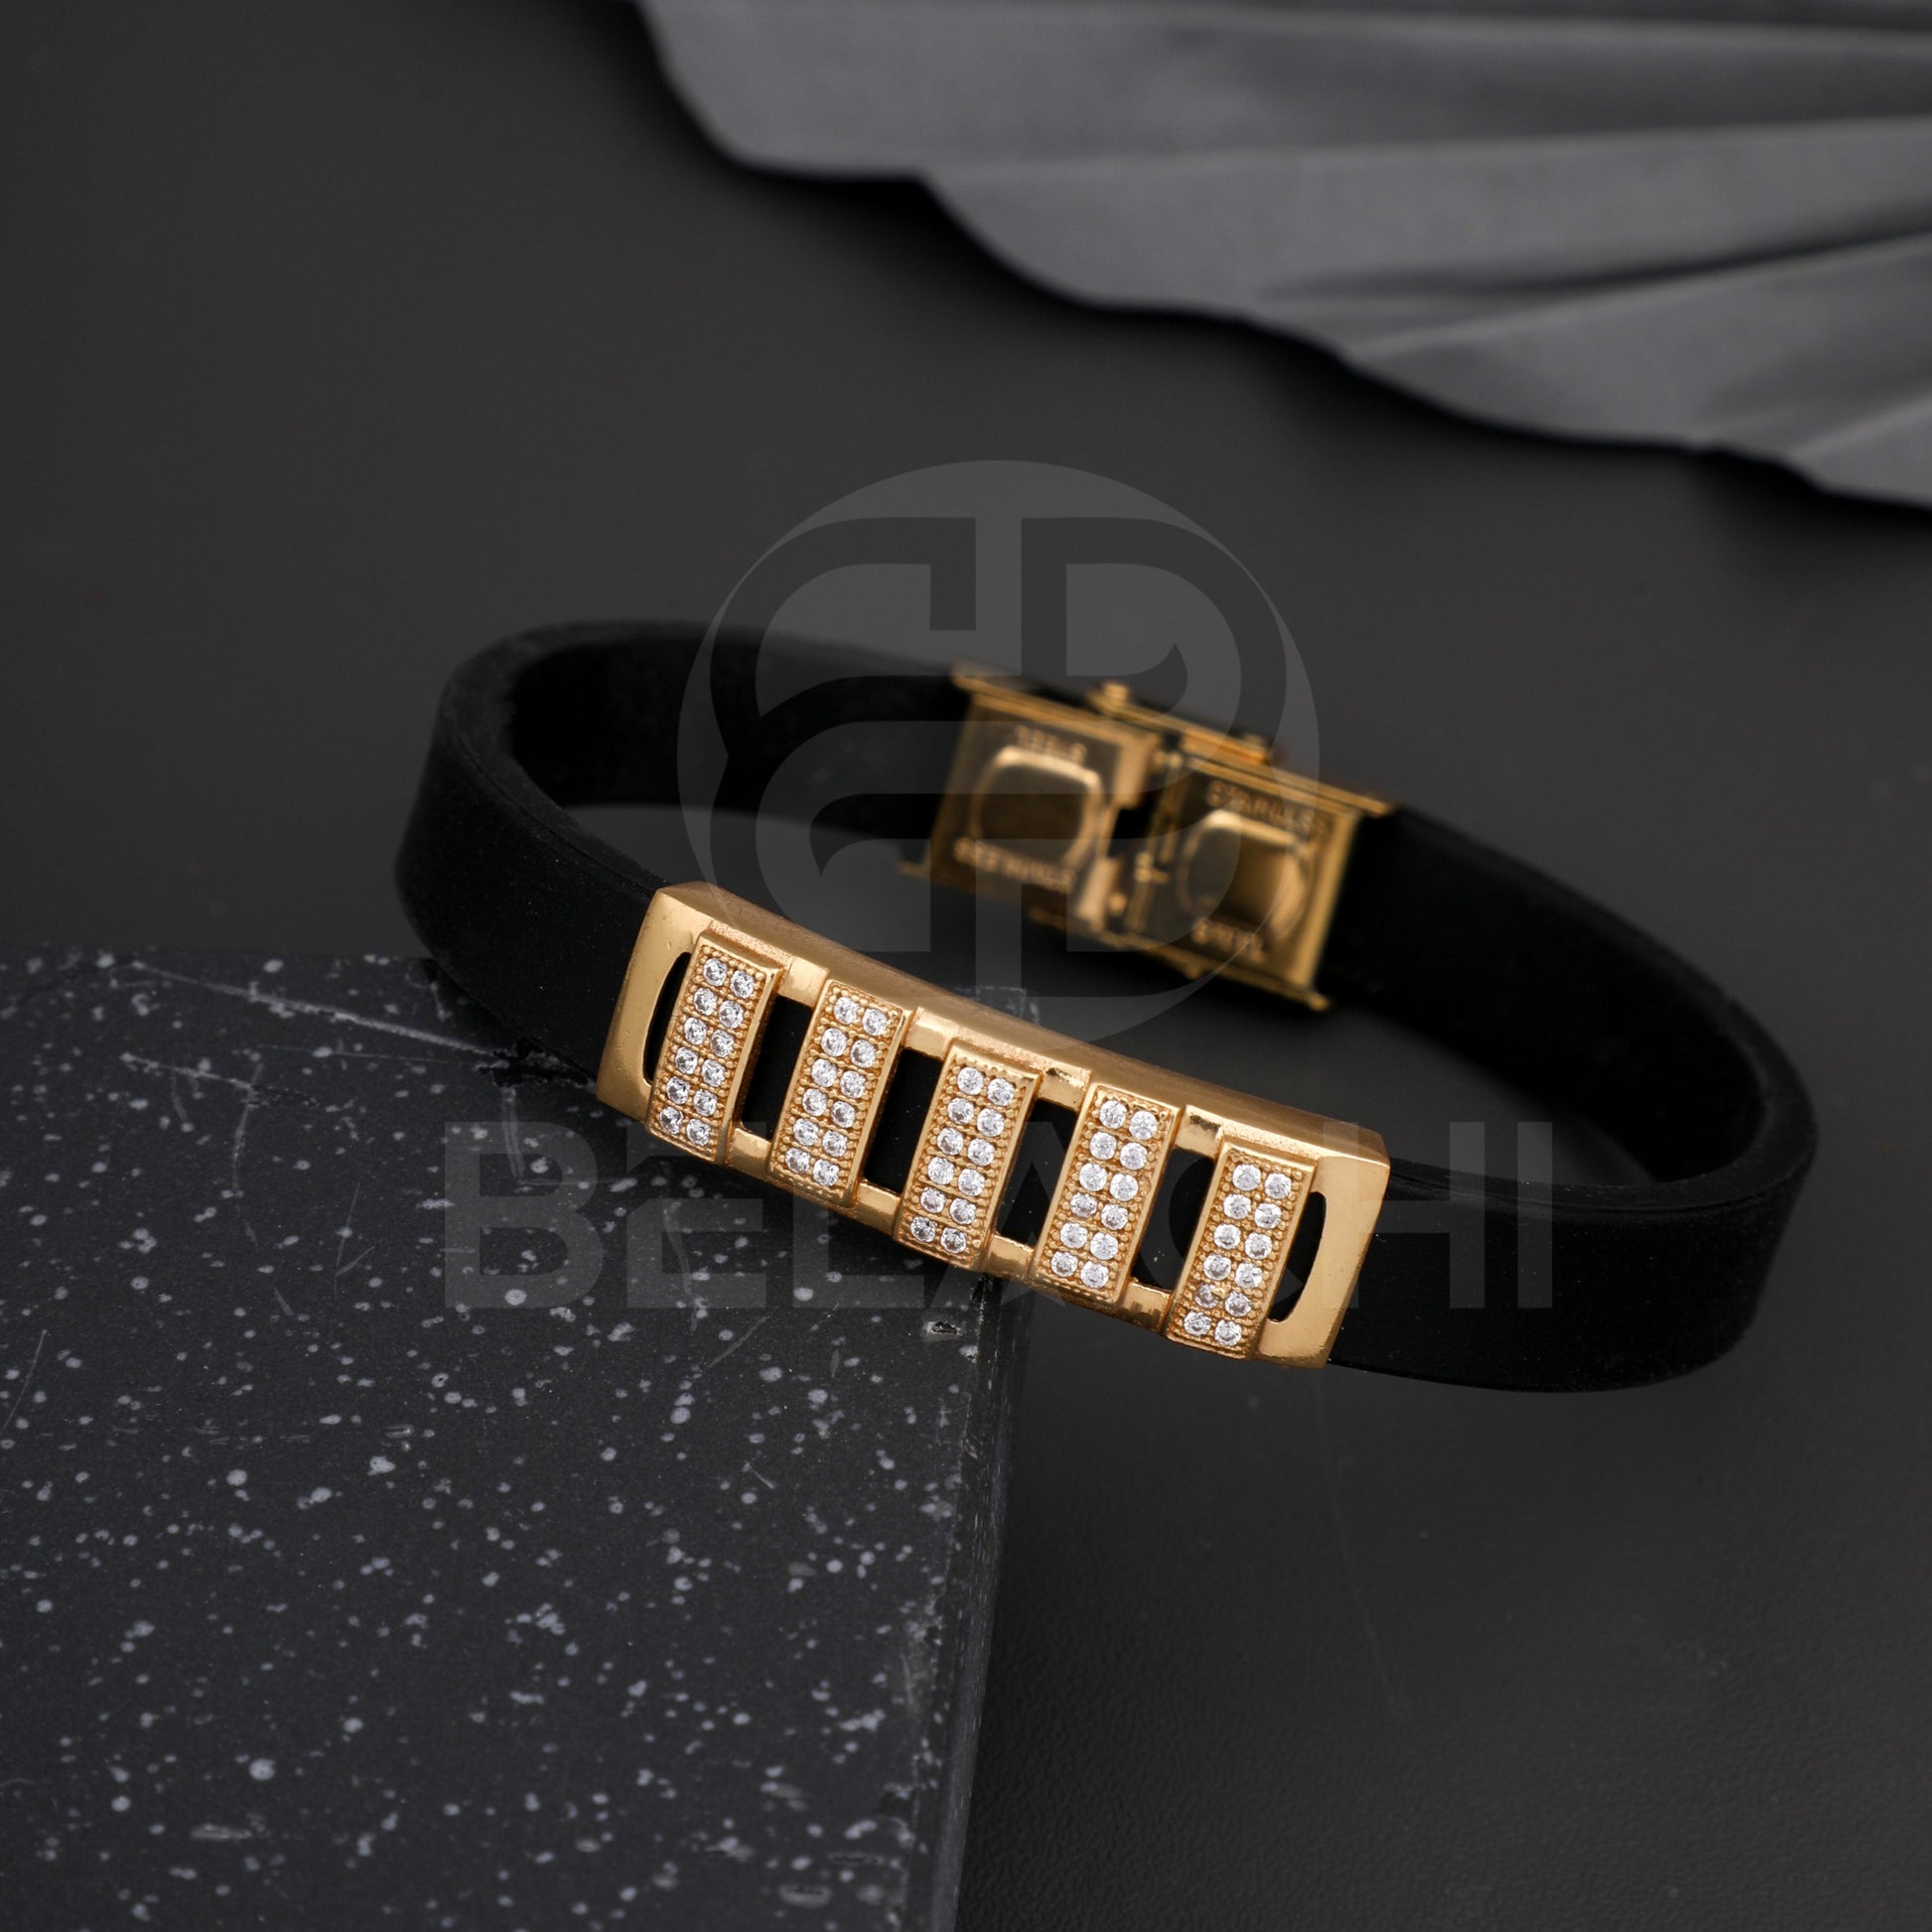 Gold Plated Morbius With Diamond In Black Silicone Bracelet